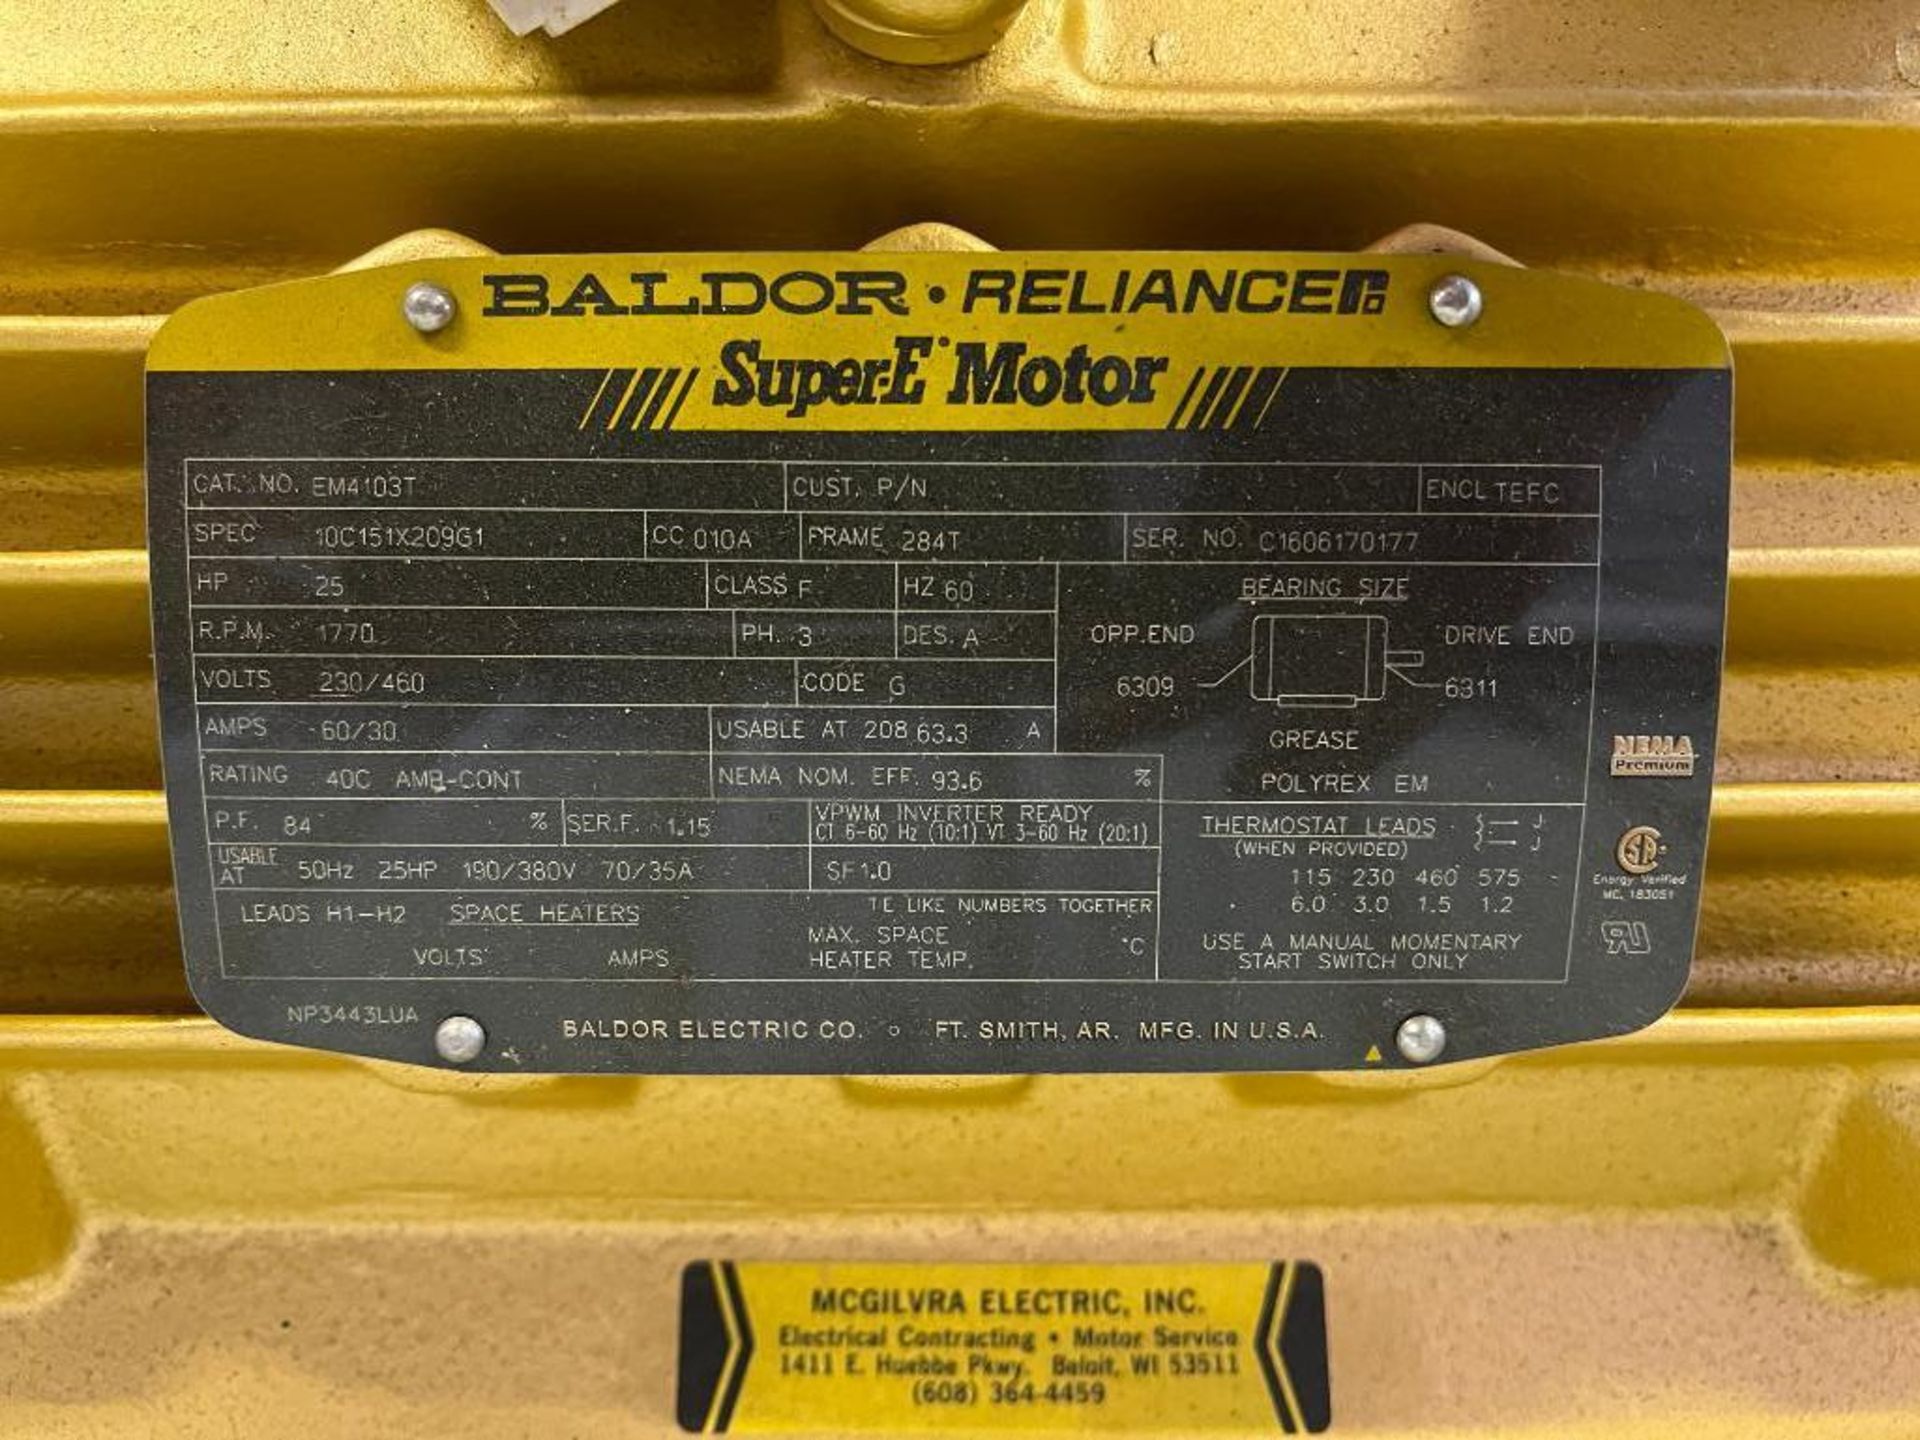 Baldor 25 HP 1,770 RPM Motor and Reliance 75 HP 3,540 RPM Motor - Rigging Fees: $50 - Image 2 of 7